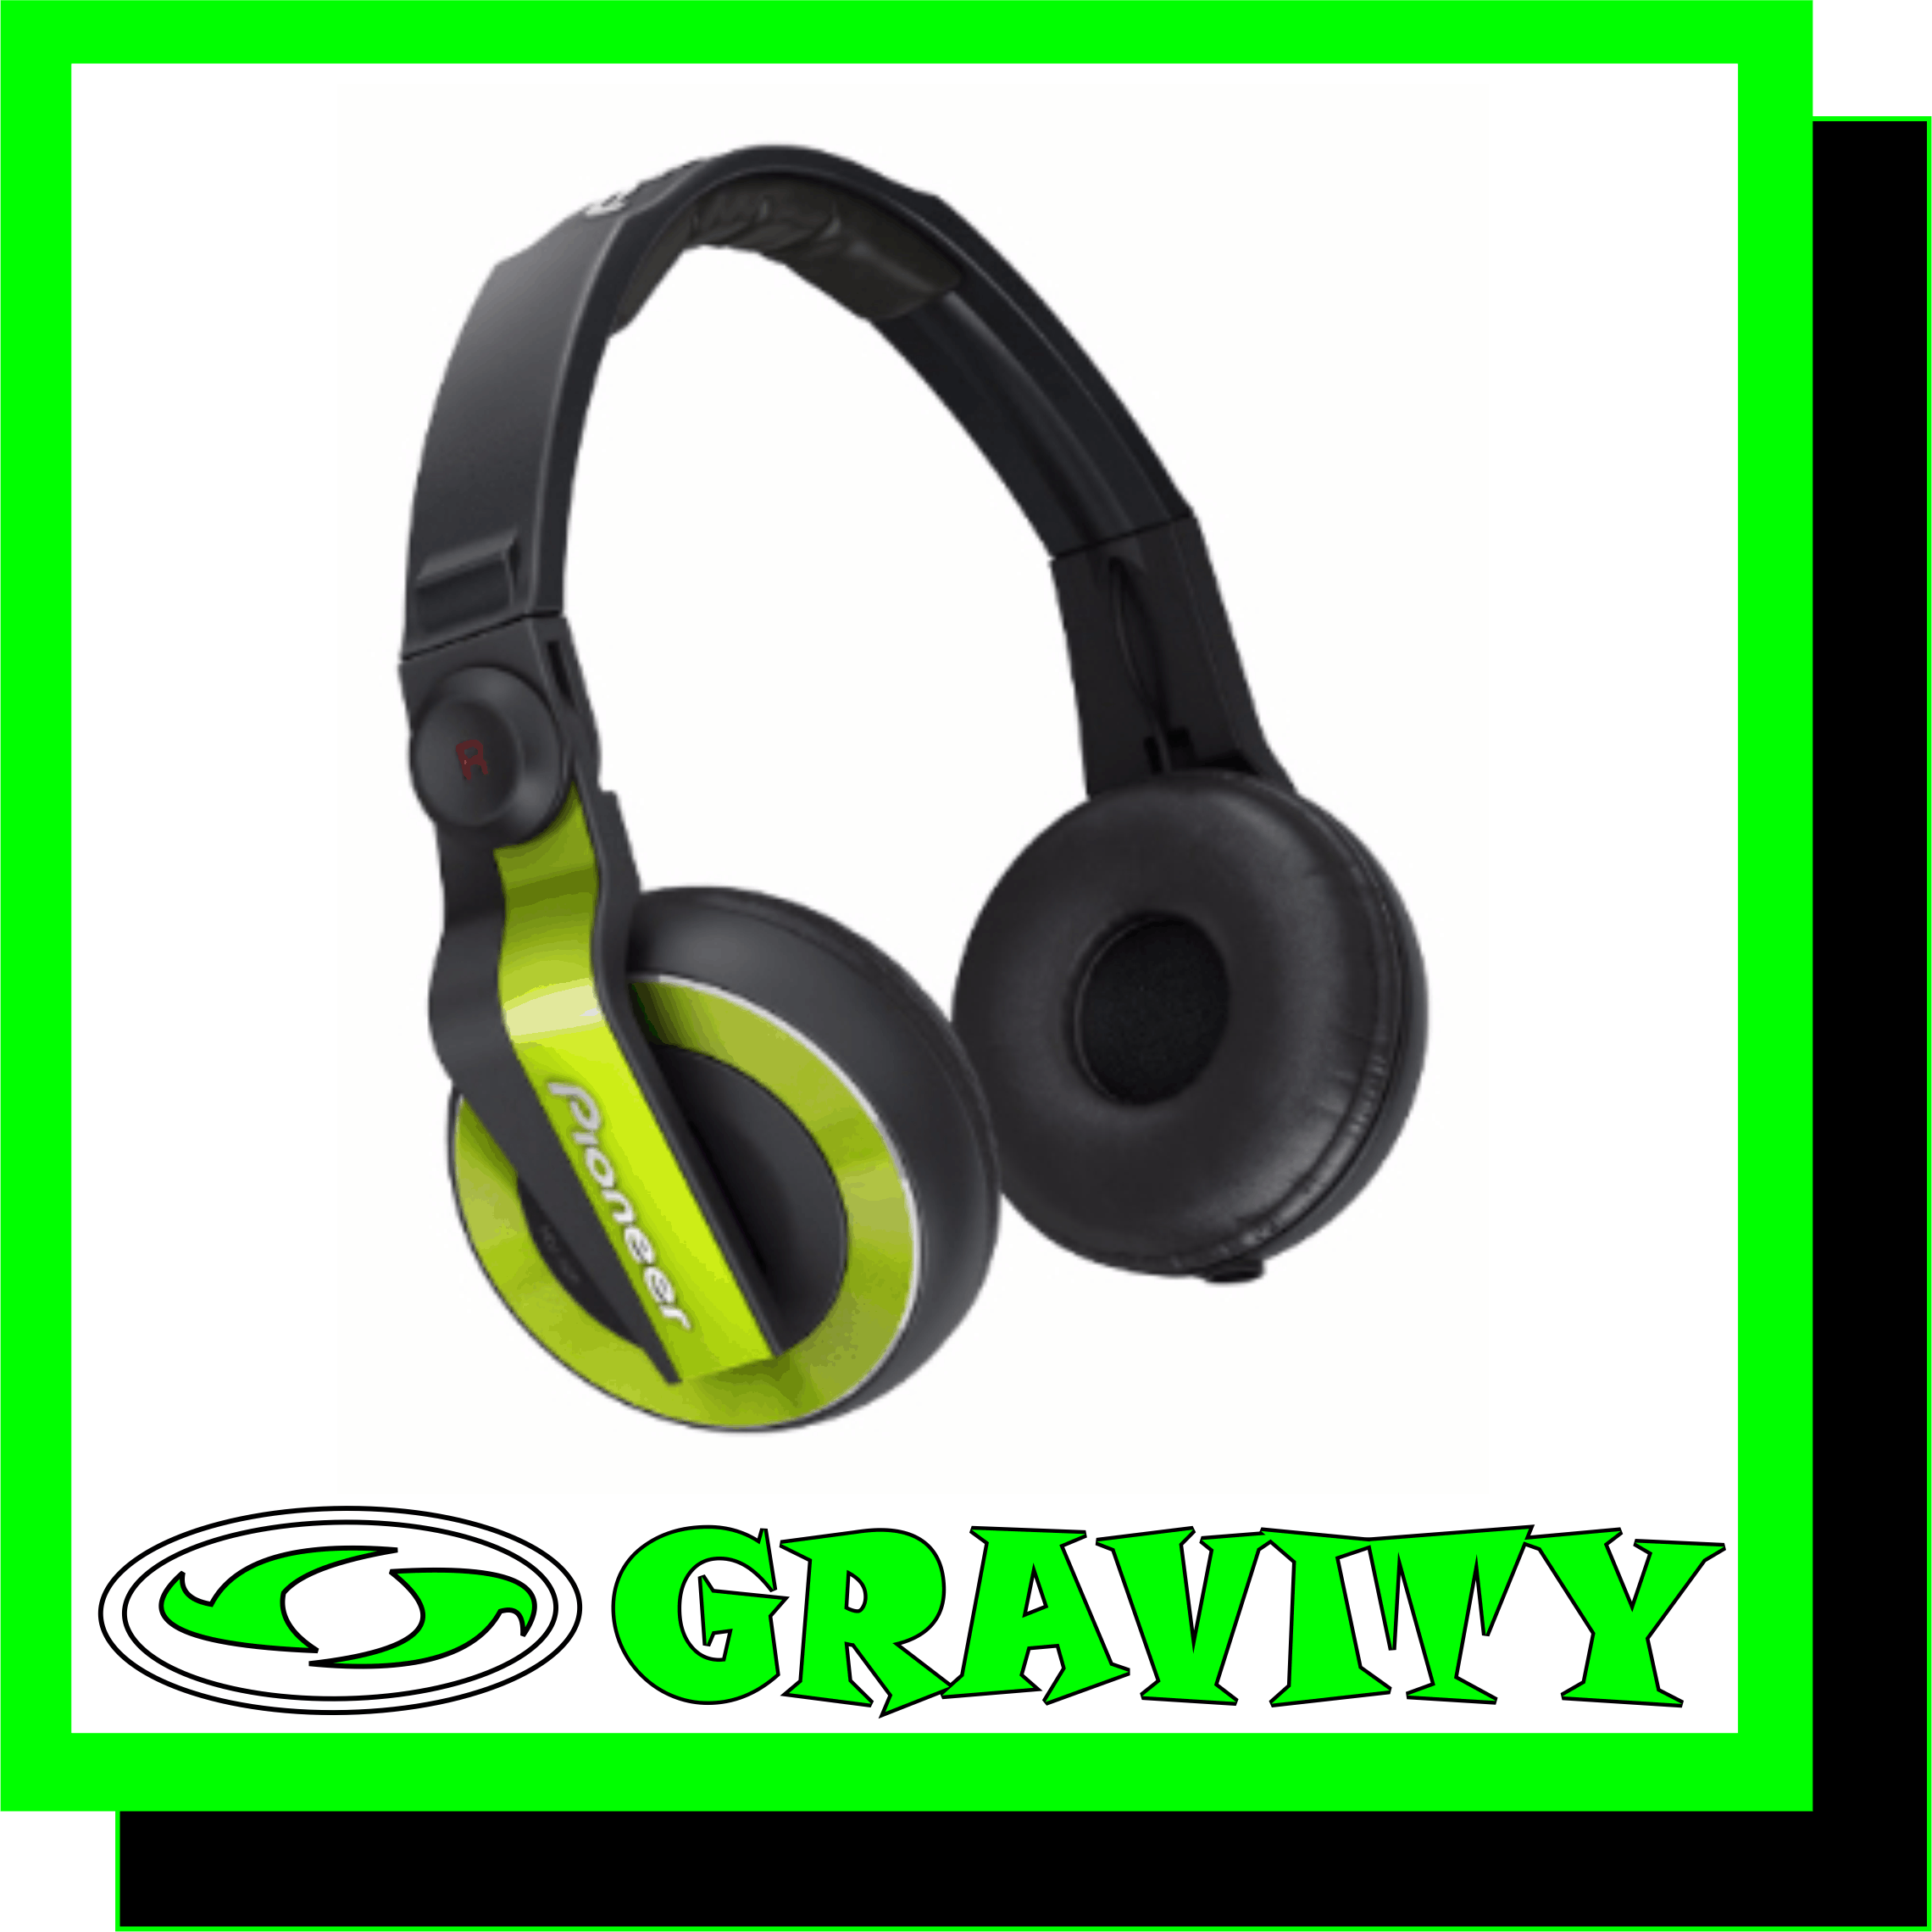 HDJ500G @ R2 350.00  DJ Headphones   Refined Design for Maximum Comfort & Reliability Advanced Sound Quality with low & mid ranges Right earpiece rotates forward and back up to 60 degrees Includes 1m straight leisure cord & coiled DJing cord GRAVITY DJ STORE 0315072736